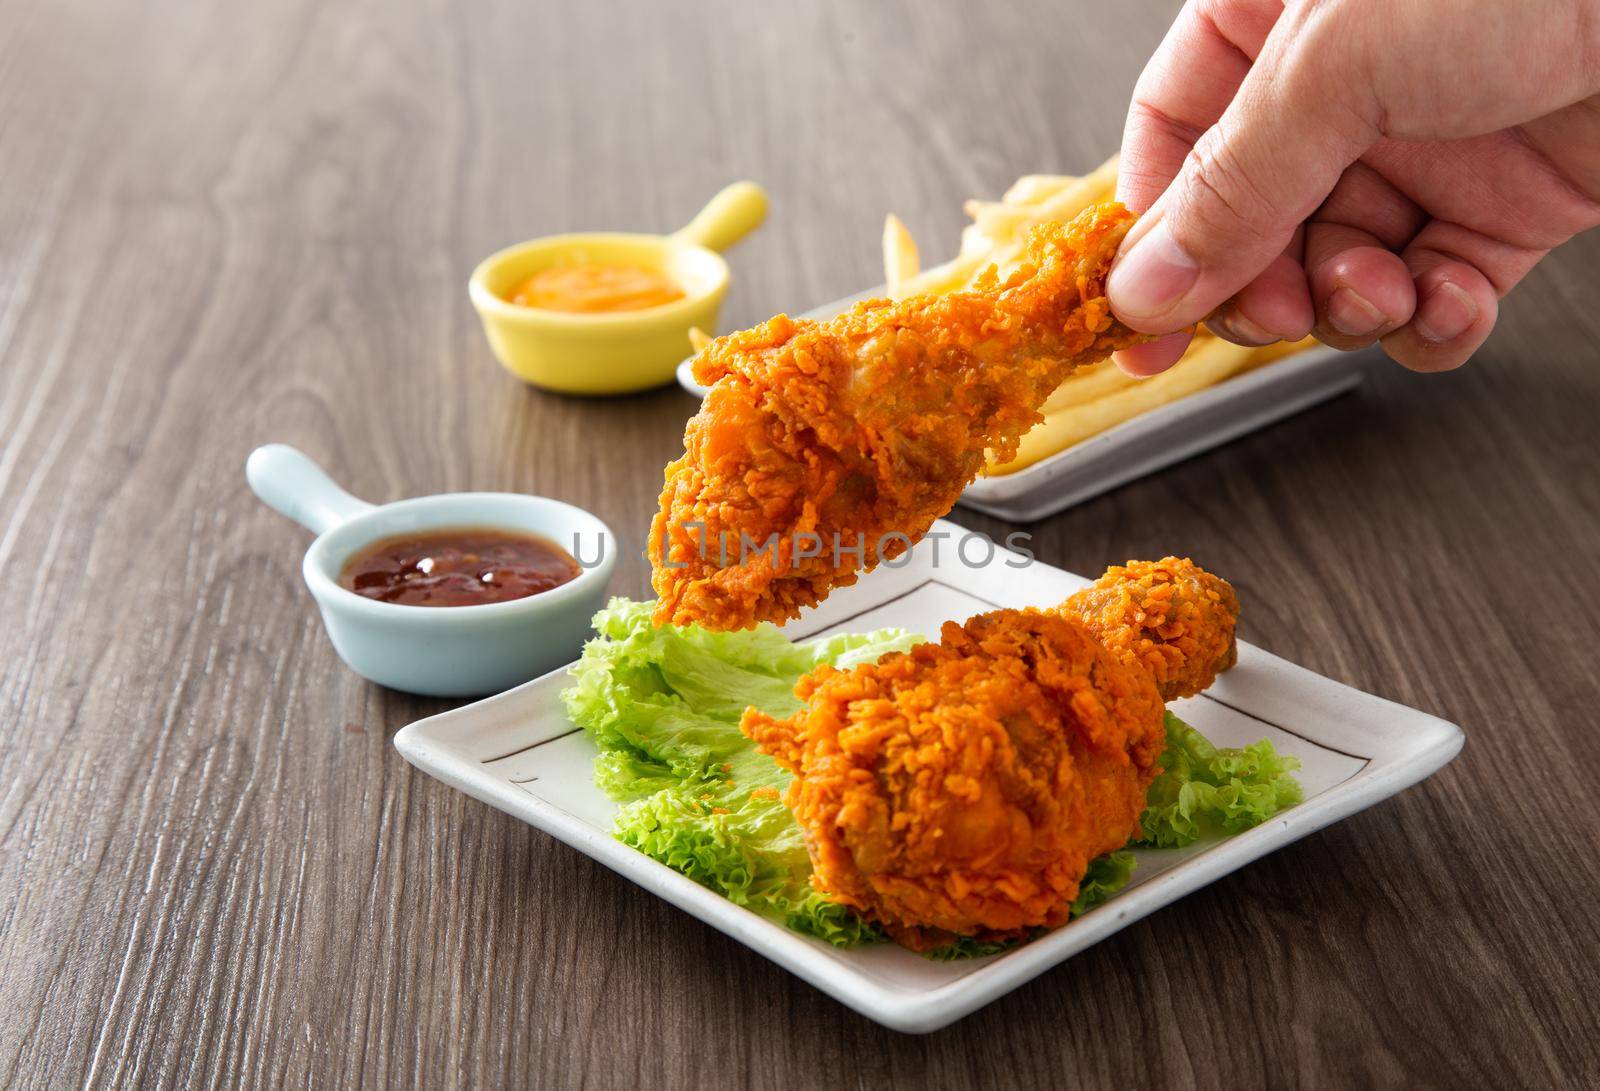 hand holding crispy and golden fried chickens with sauce on wooden table